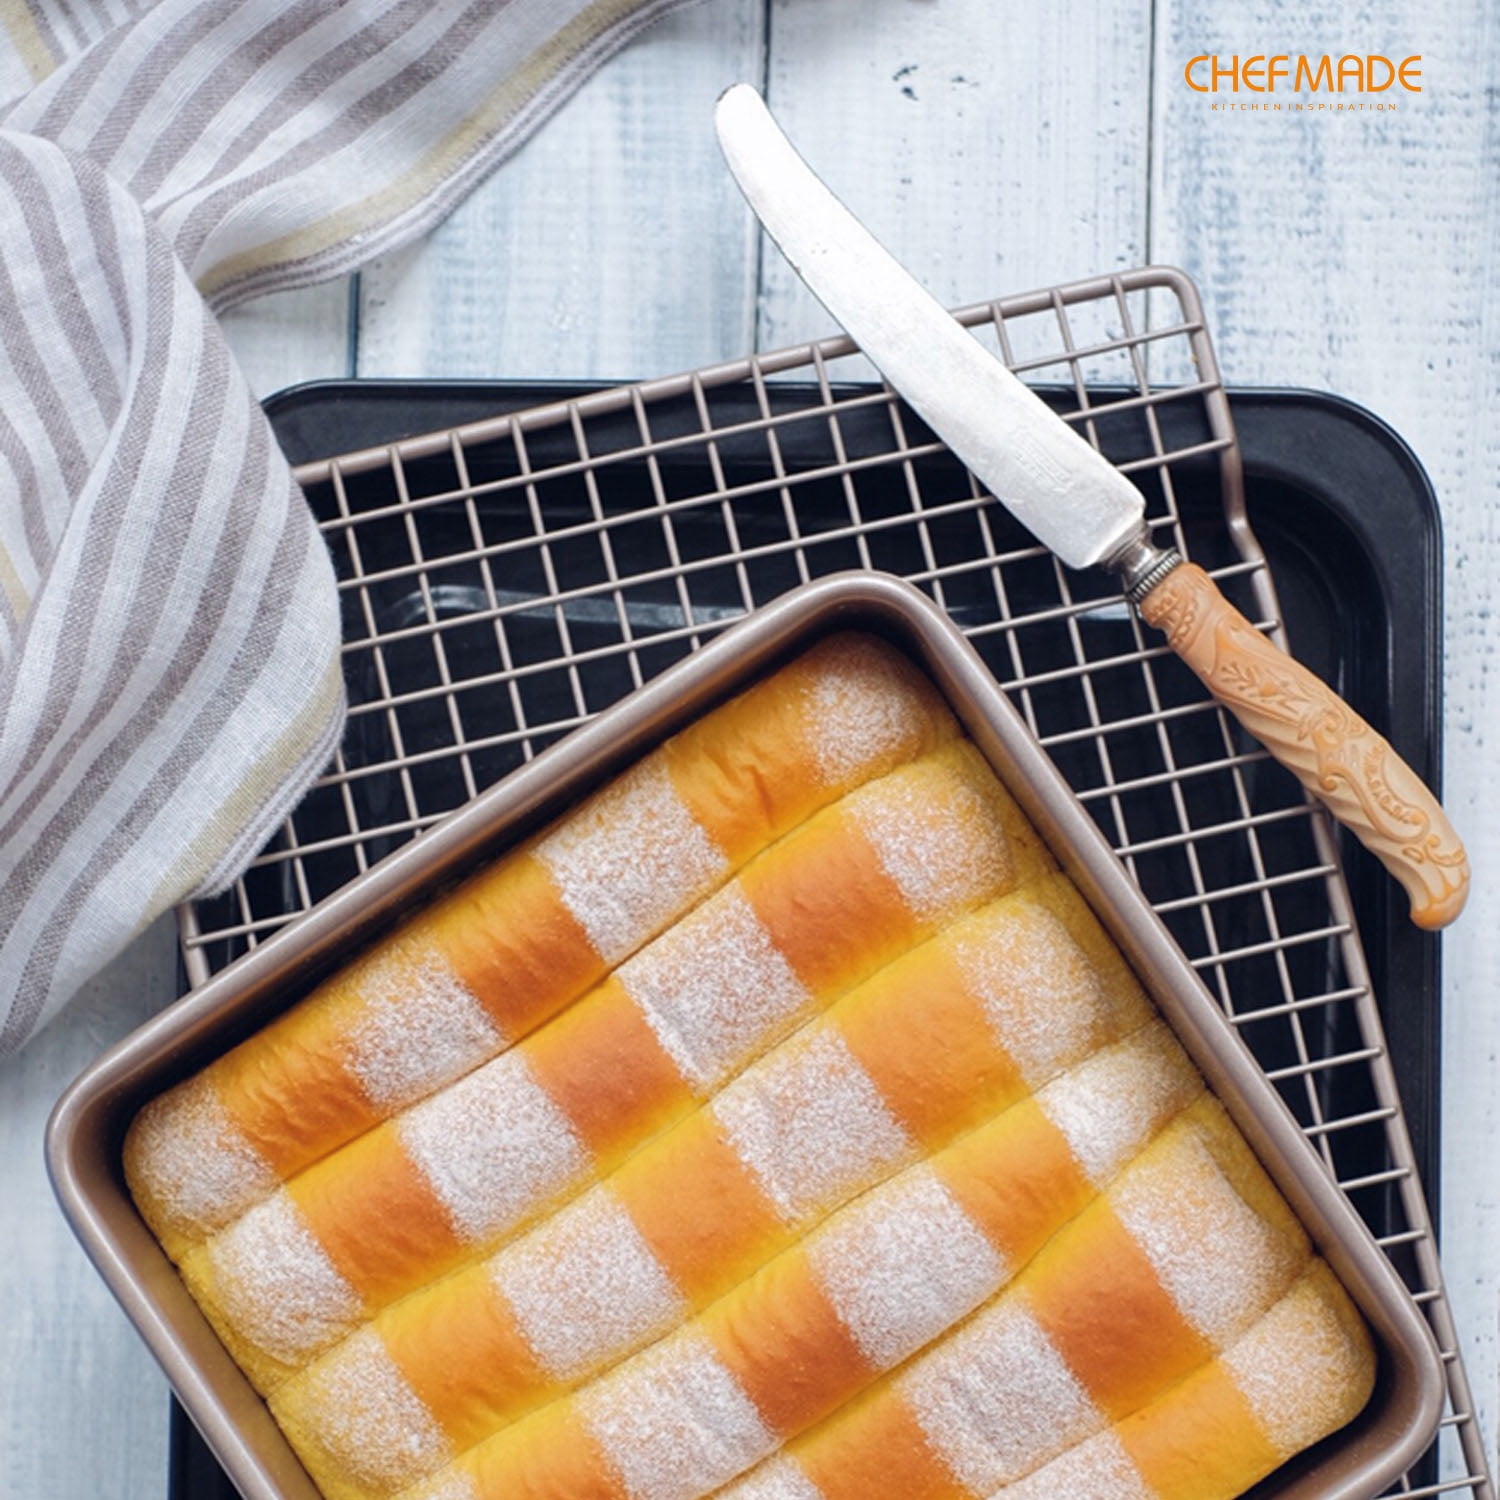 CHEFMADE Square Cake Pan, 8-Inch Deep Dish with Removable Loose Bottom  Non-Stick Square Bakeware for Oven Baking (Champagne Gold) - Walmart.com